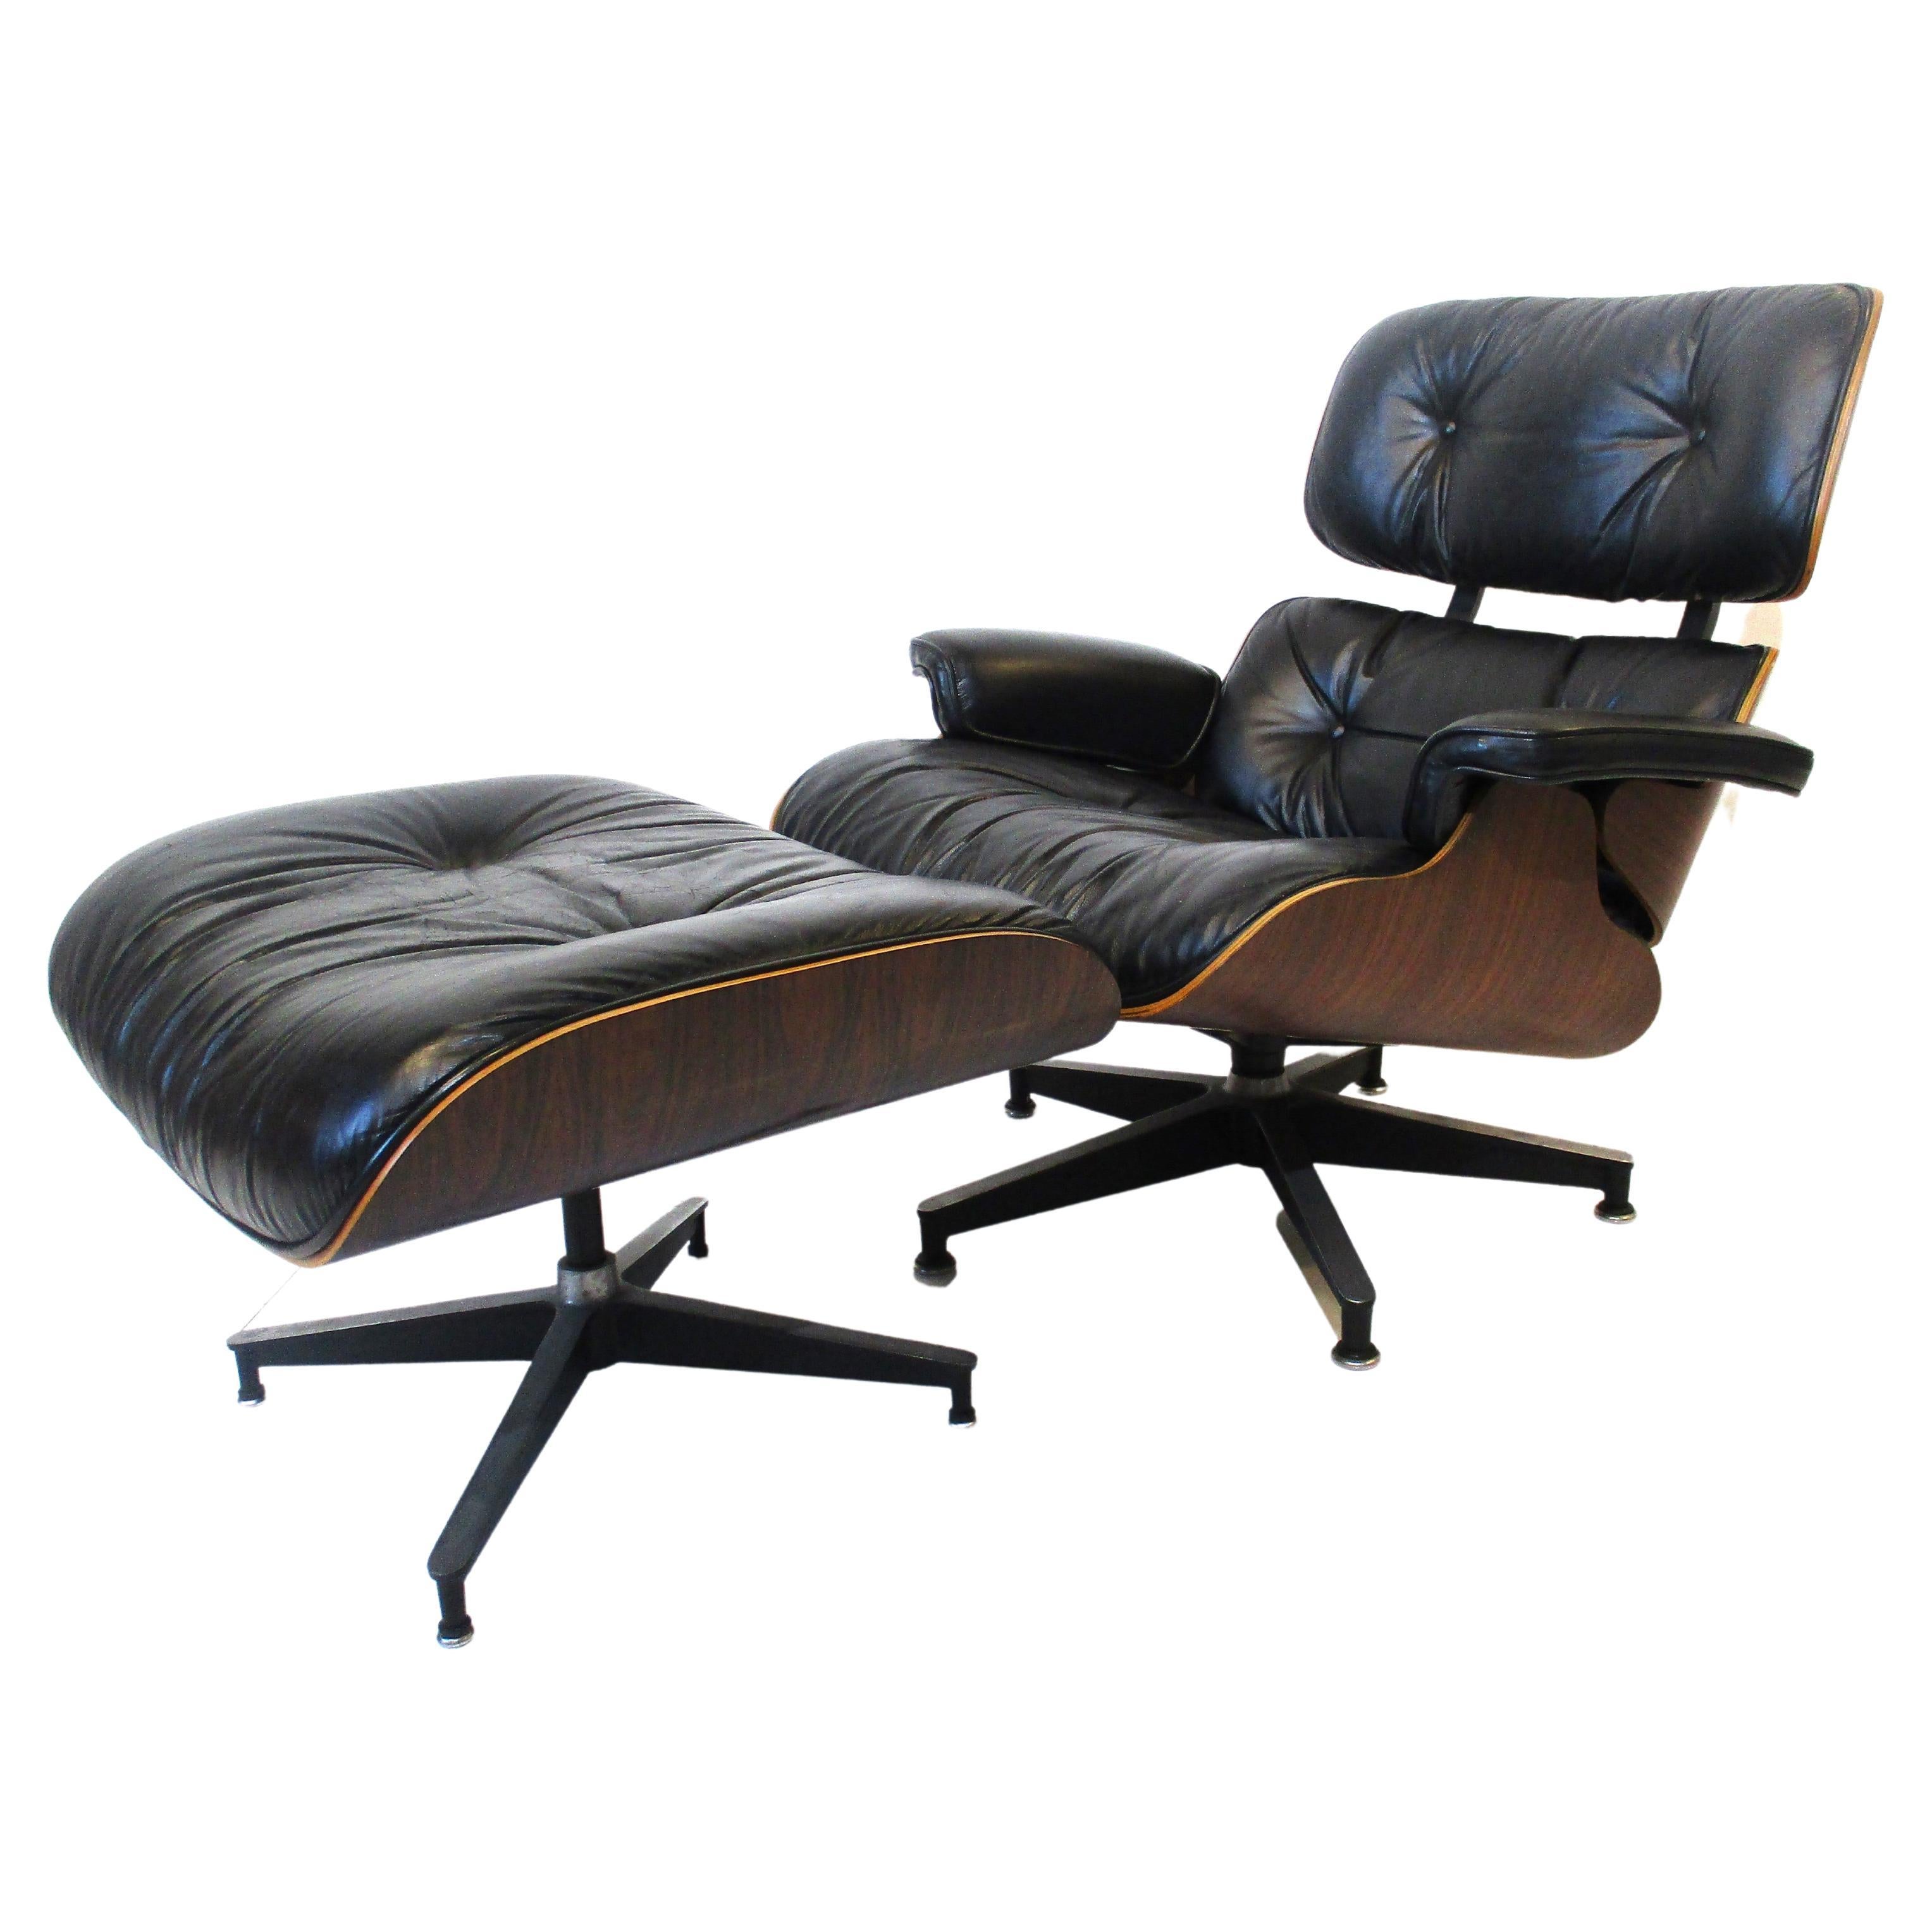 A very well crafted iconic Eames 670 lounge chair and 671 ottoman in a deep dark beautiful Brazilian rosewood , topped in a smooth soft black leather . The chair sits on a cast aluminum swiveling star base with footpads and the ottoman is non